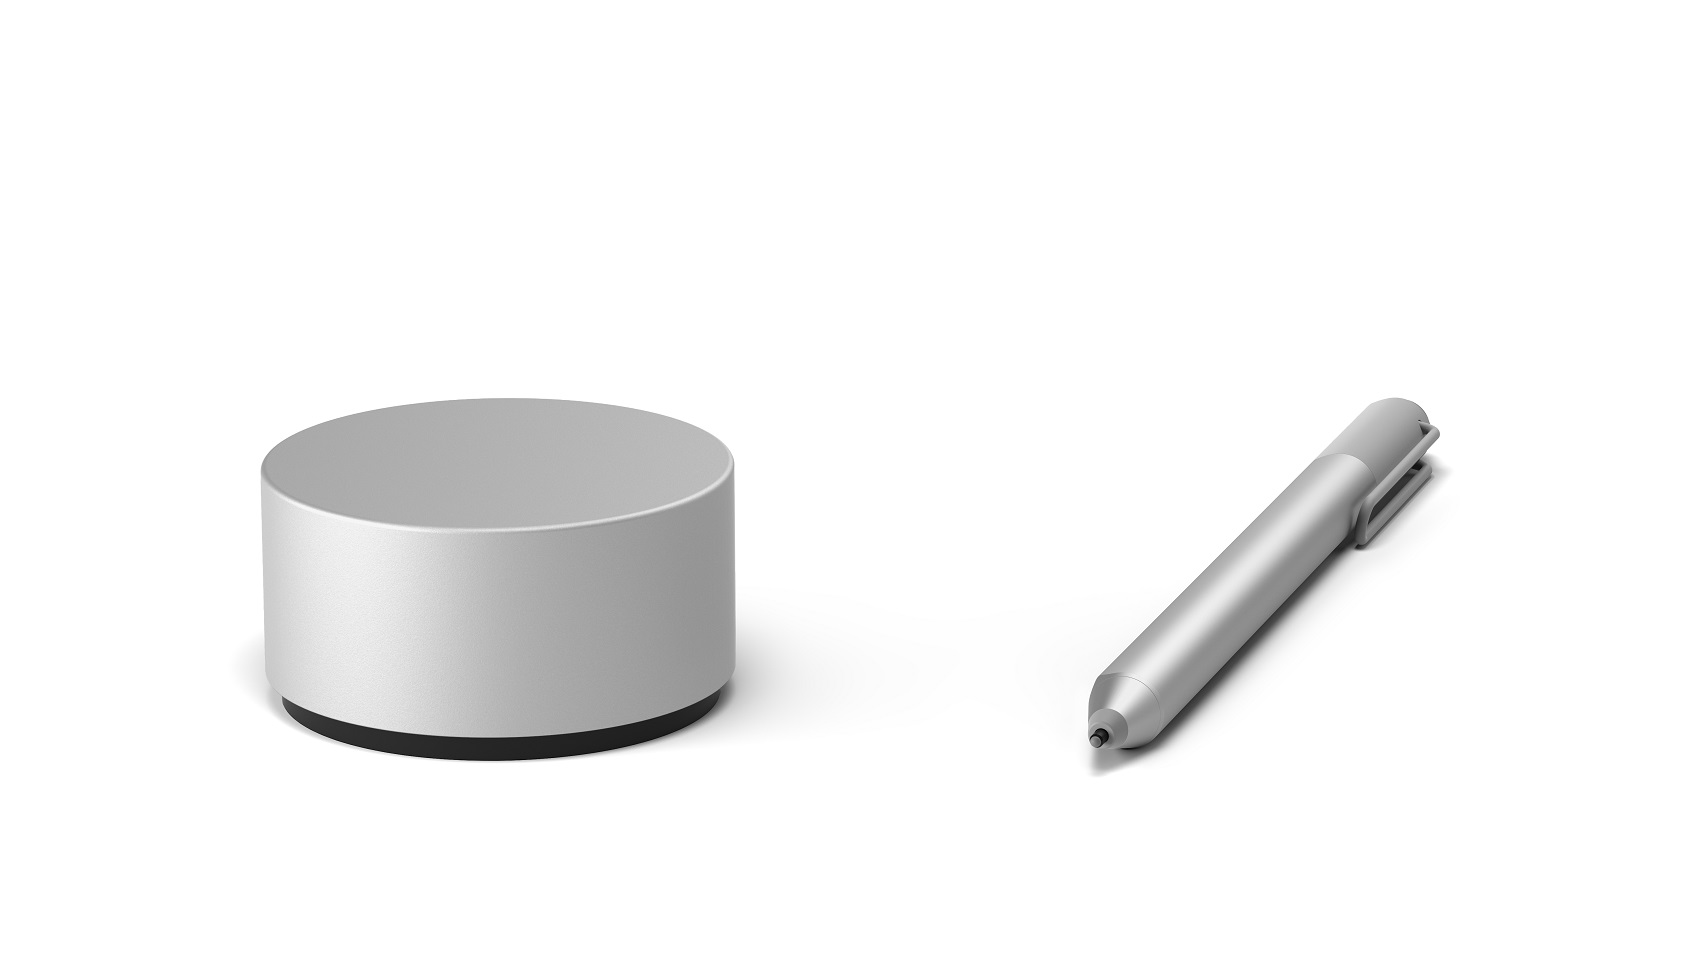 Combine Surface Dial and Surface Pen to create a more immersive and tactile way to create in digital environments